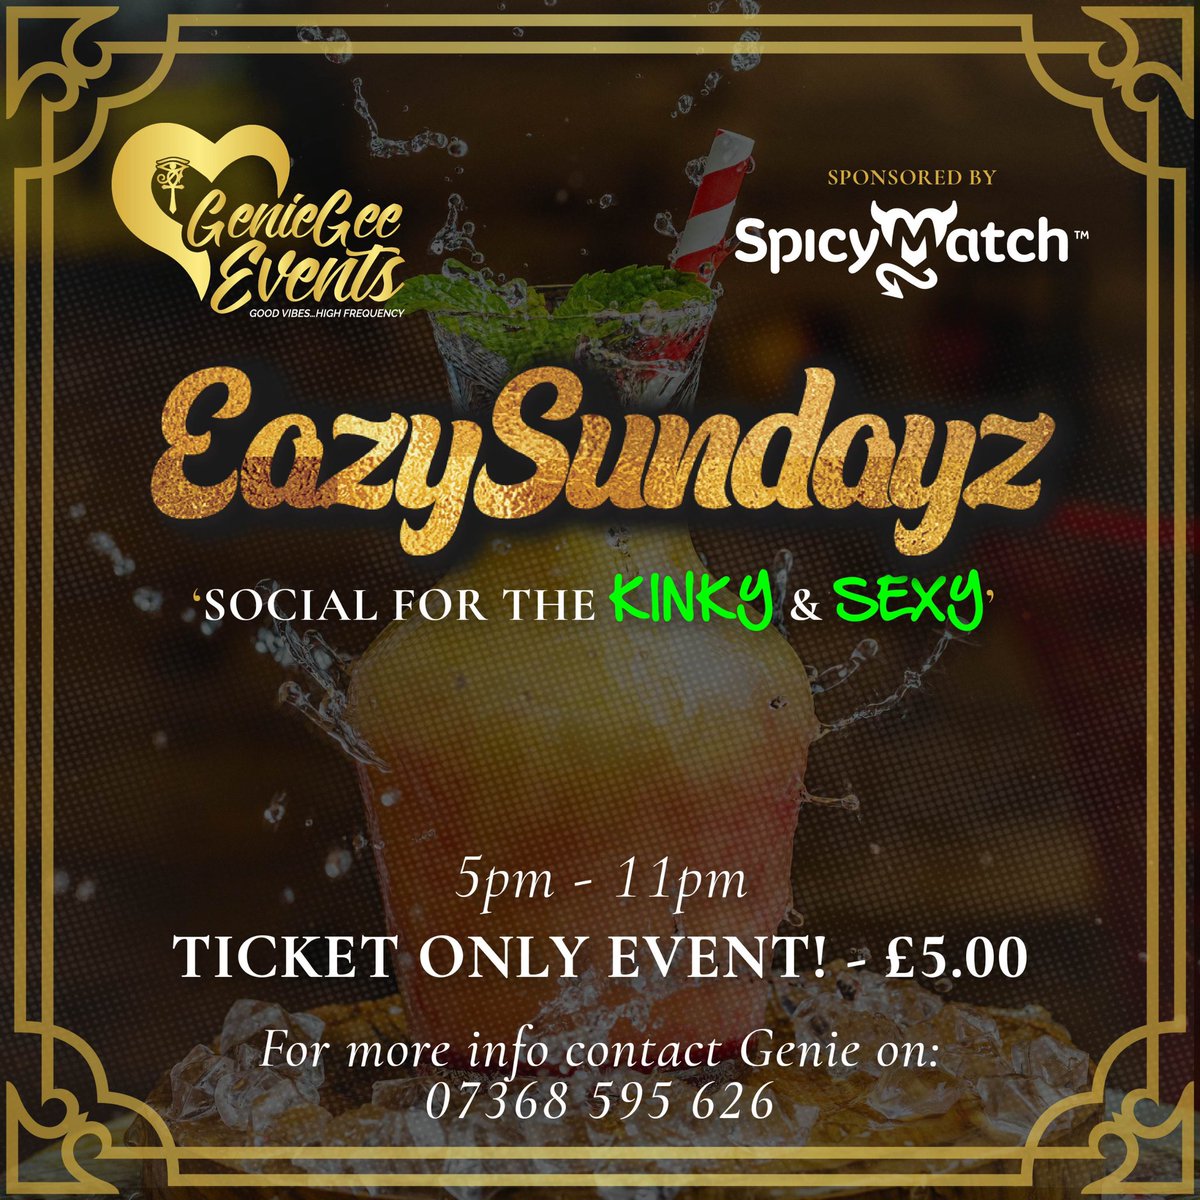 Eazy Sundayz ‘A Social for the Kinky and Sexy’ Whoop 🙌🏾 NEXT WEEKEND 💃🏽🕺🏽 Sunday 21st April 5pm - 11pm N1 Nearest station: Angel Tickets OUT NOW! Get yours here 👇🏾 buytickets.at/geniegee/12160… Brought to you by @GenieGeeEvents Sponsored by @SpicyMatch